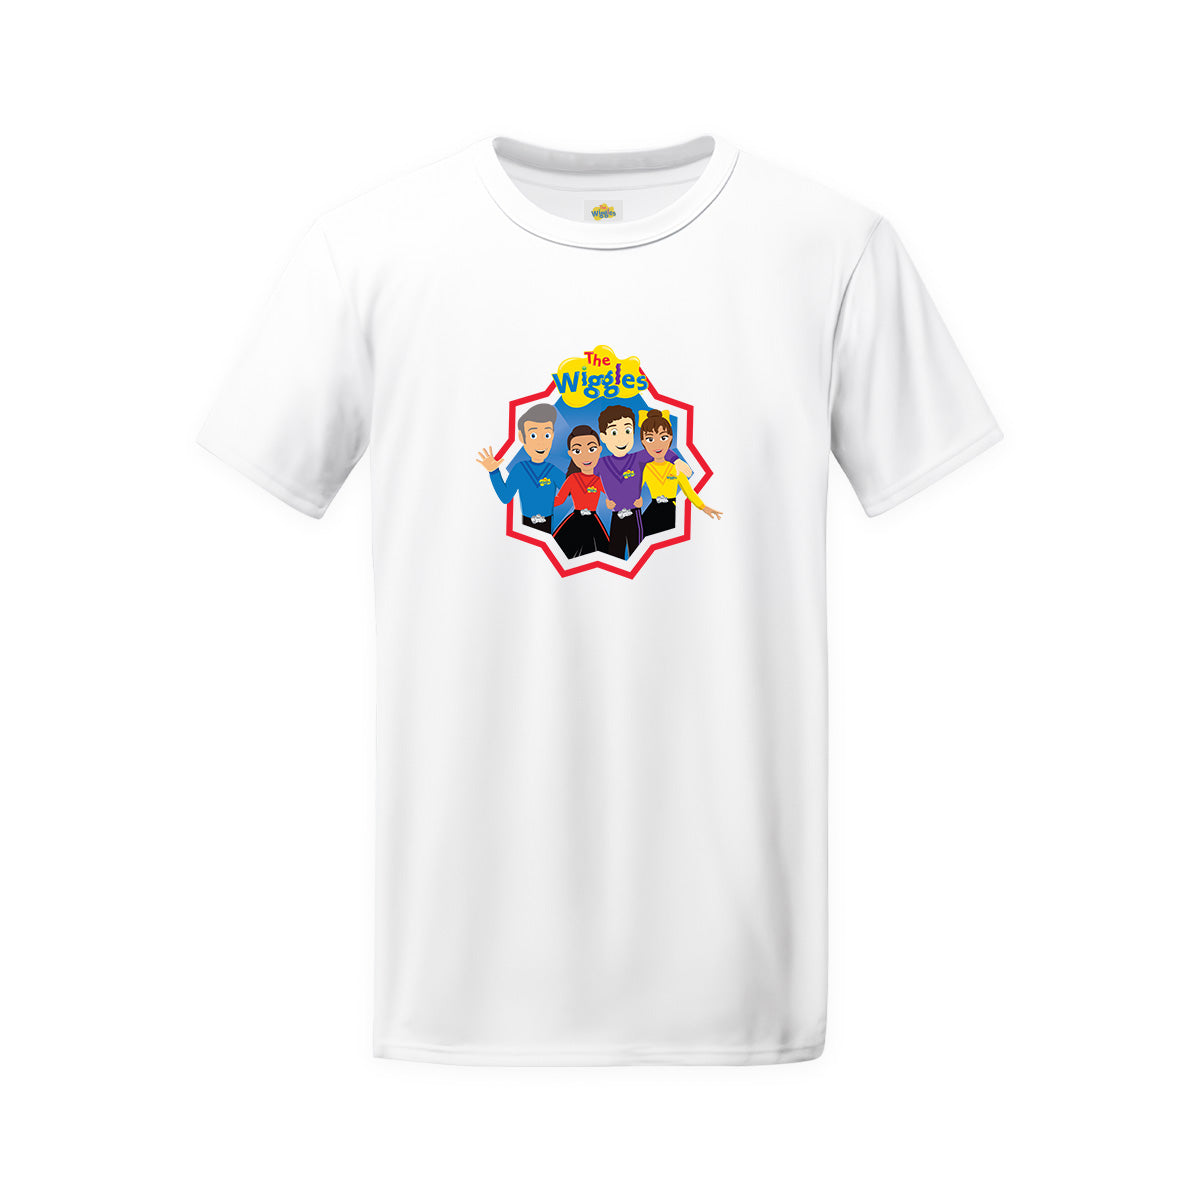 The Wiggles Adult Group Short Sleeve T-Shirt V2